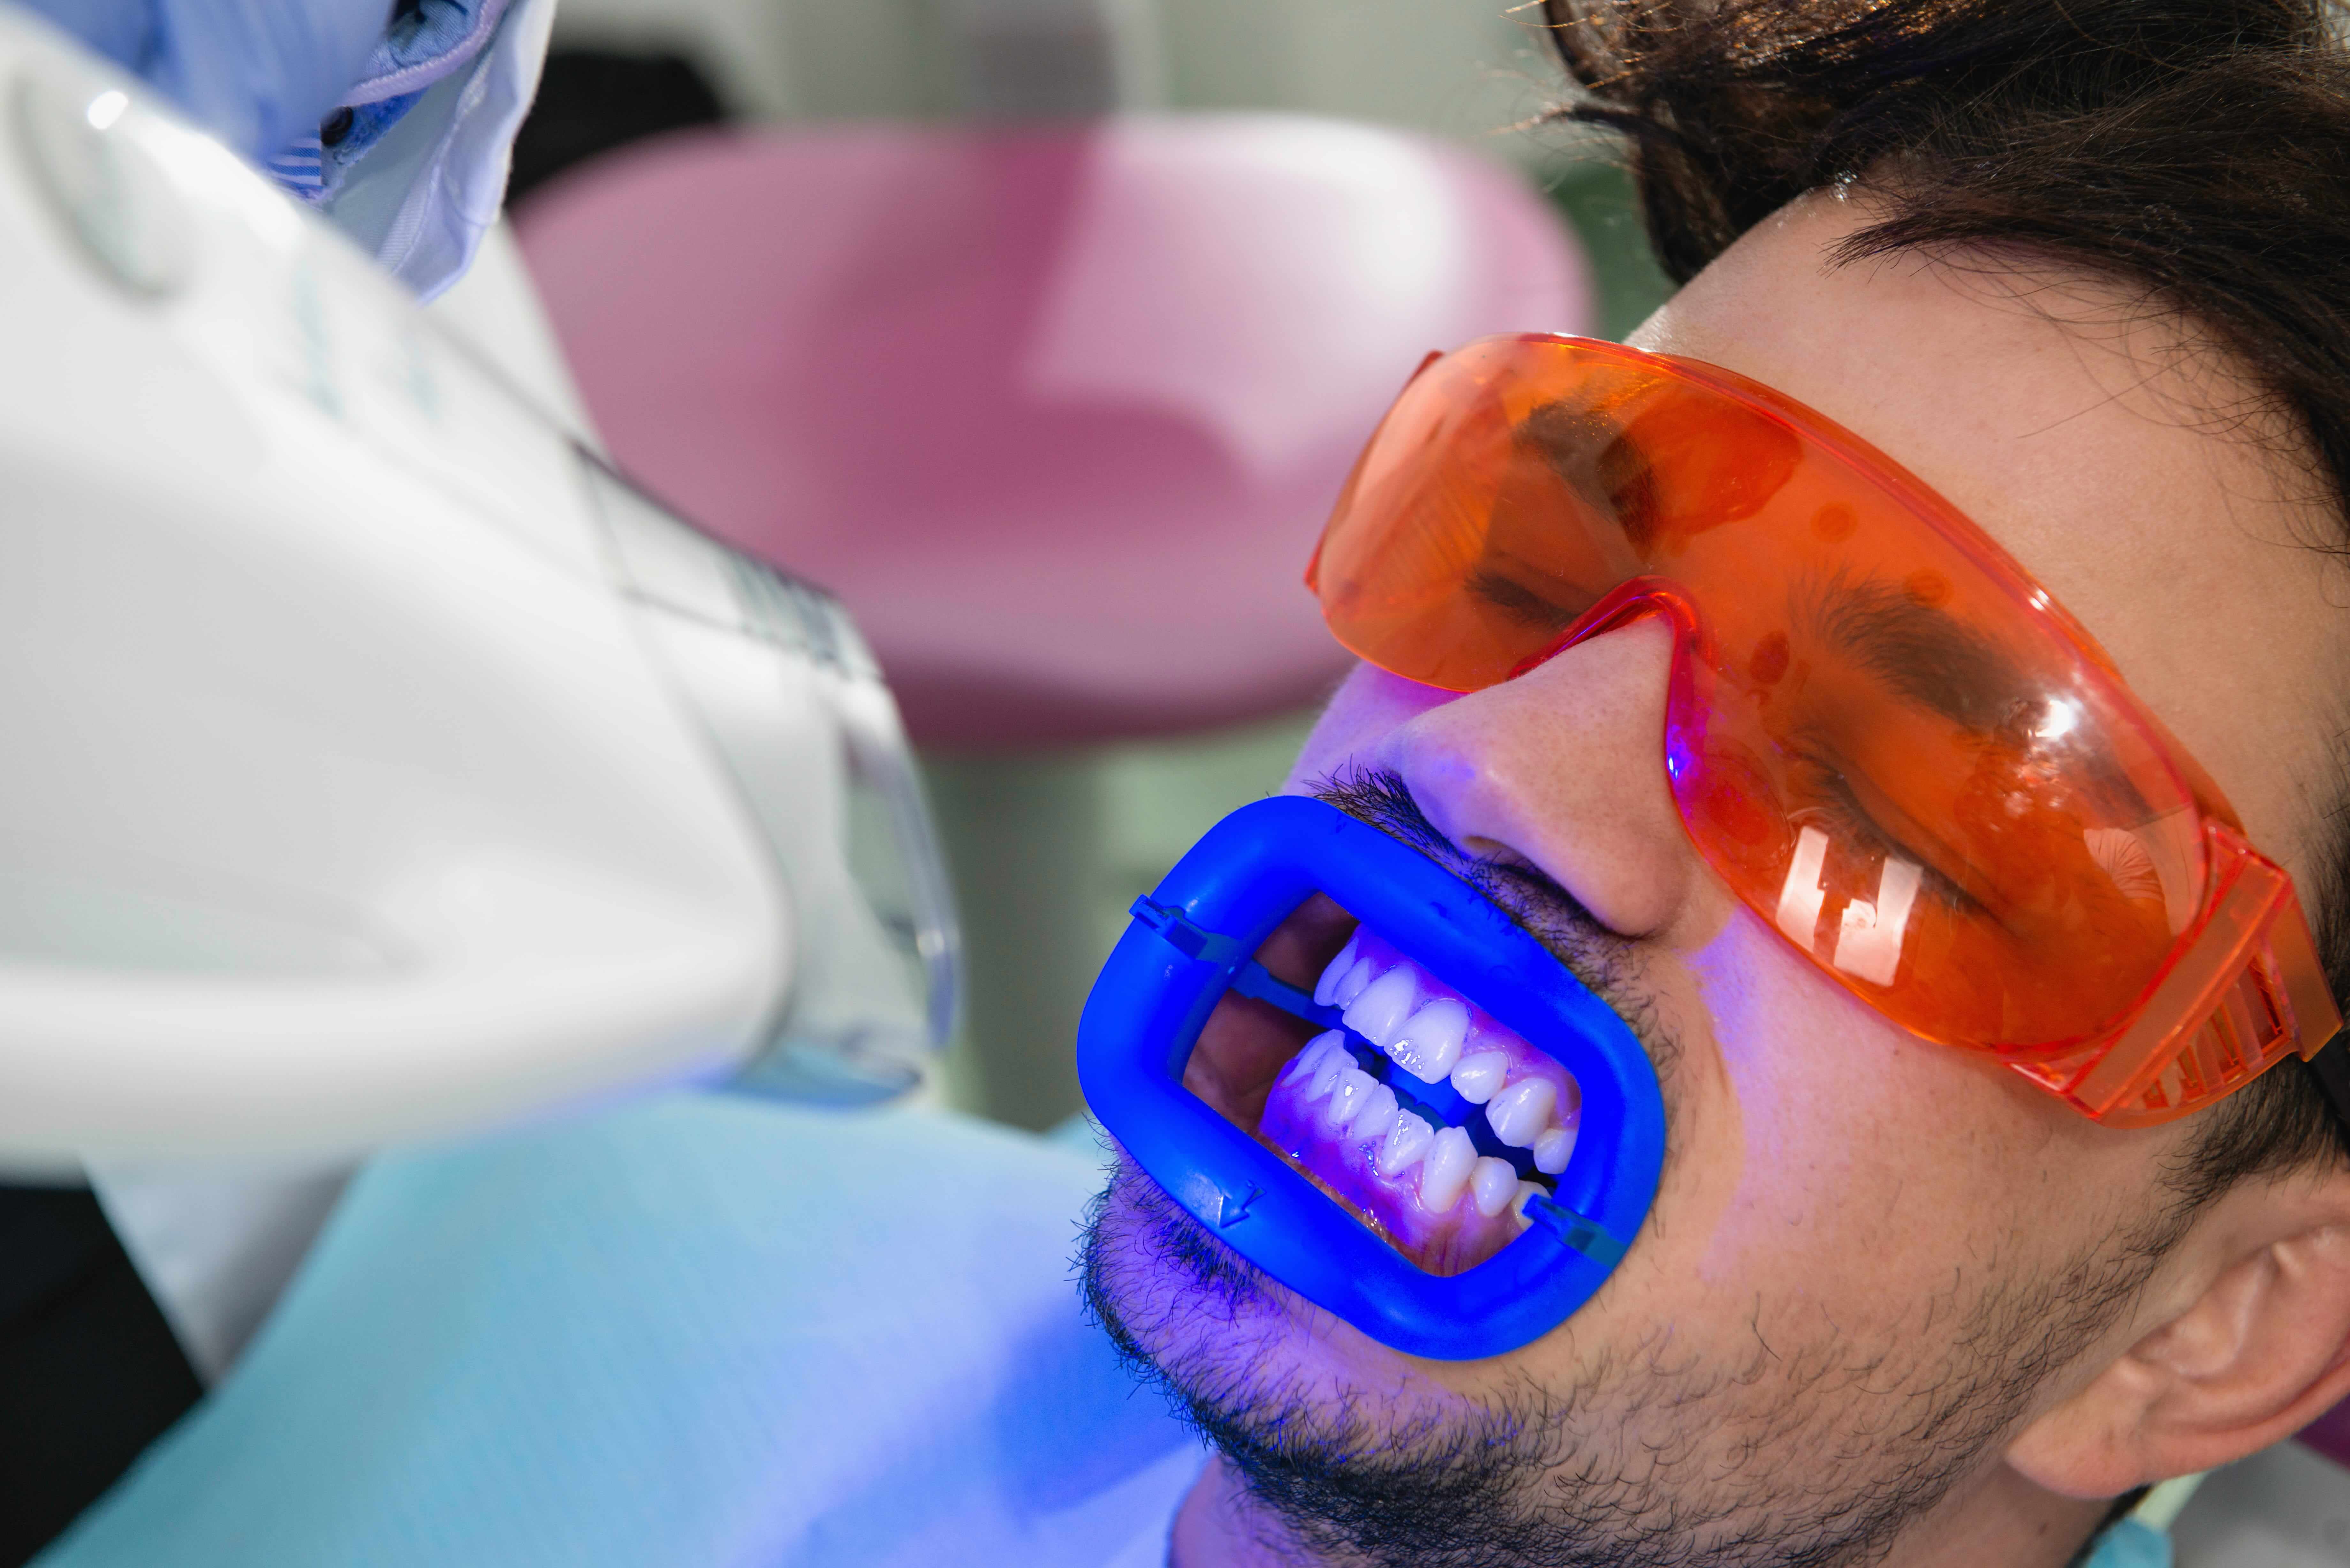 Professional Teeth Whitening | Your Options and What it Costs